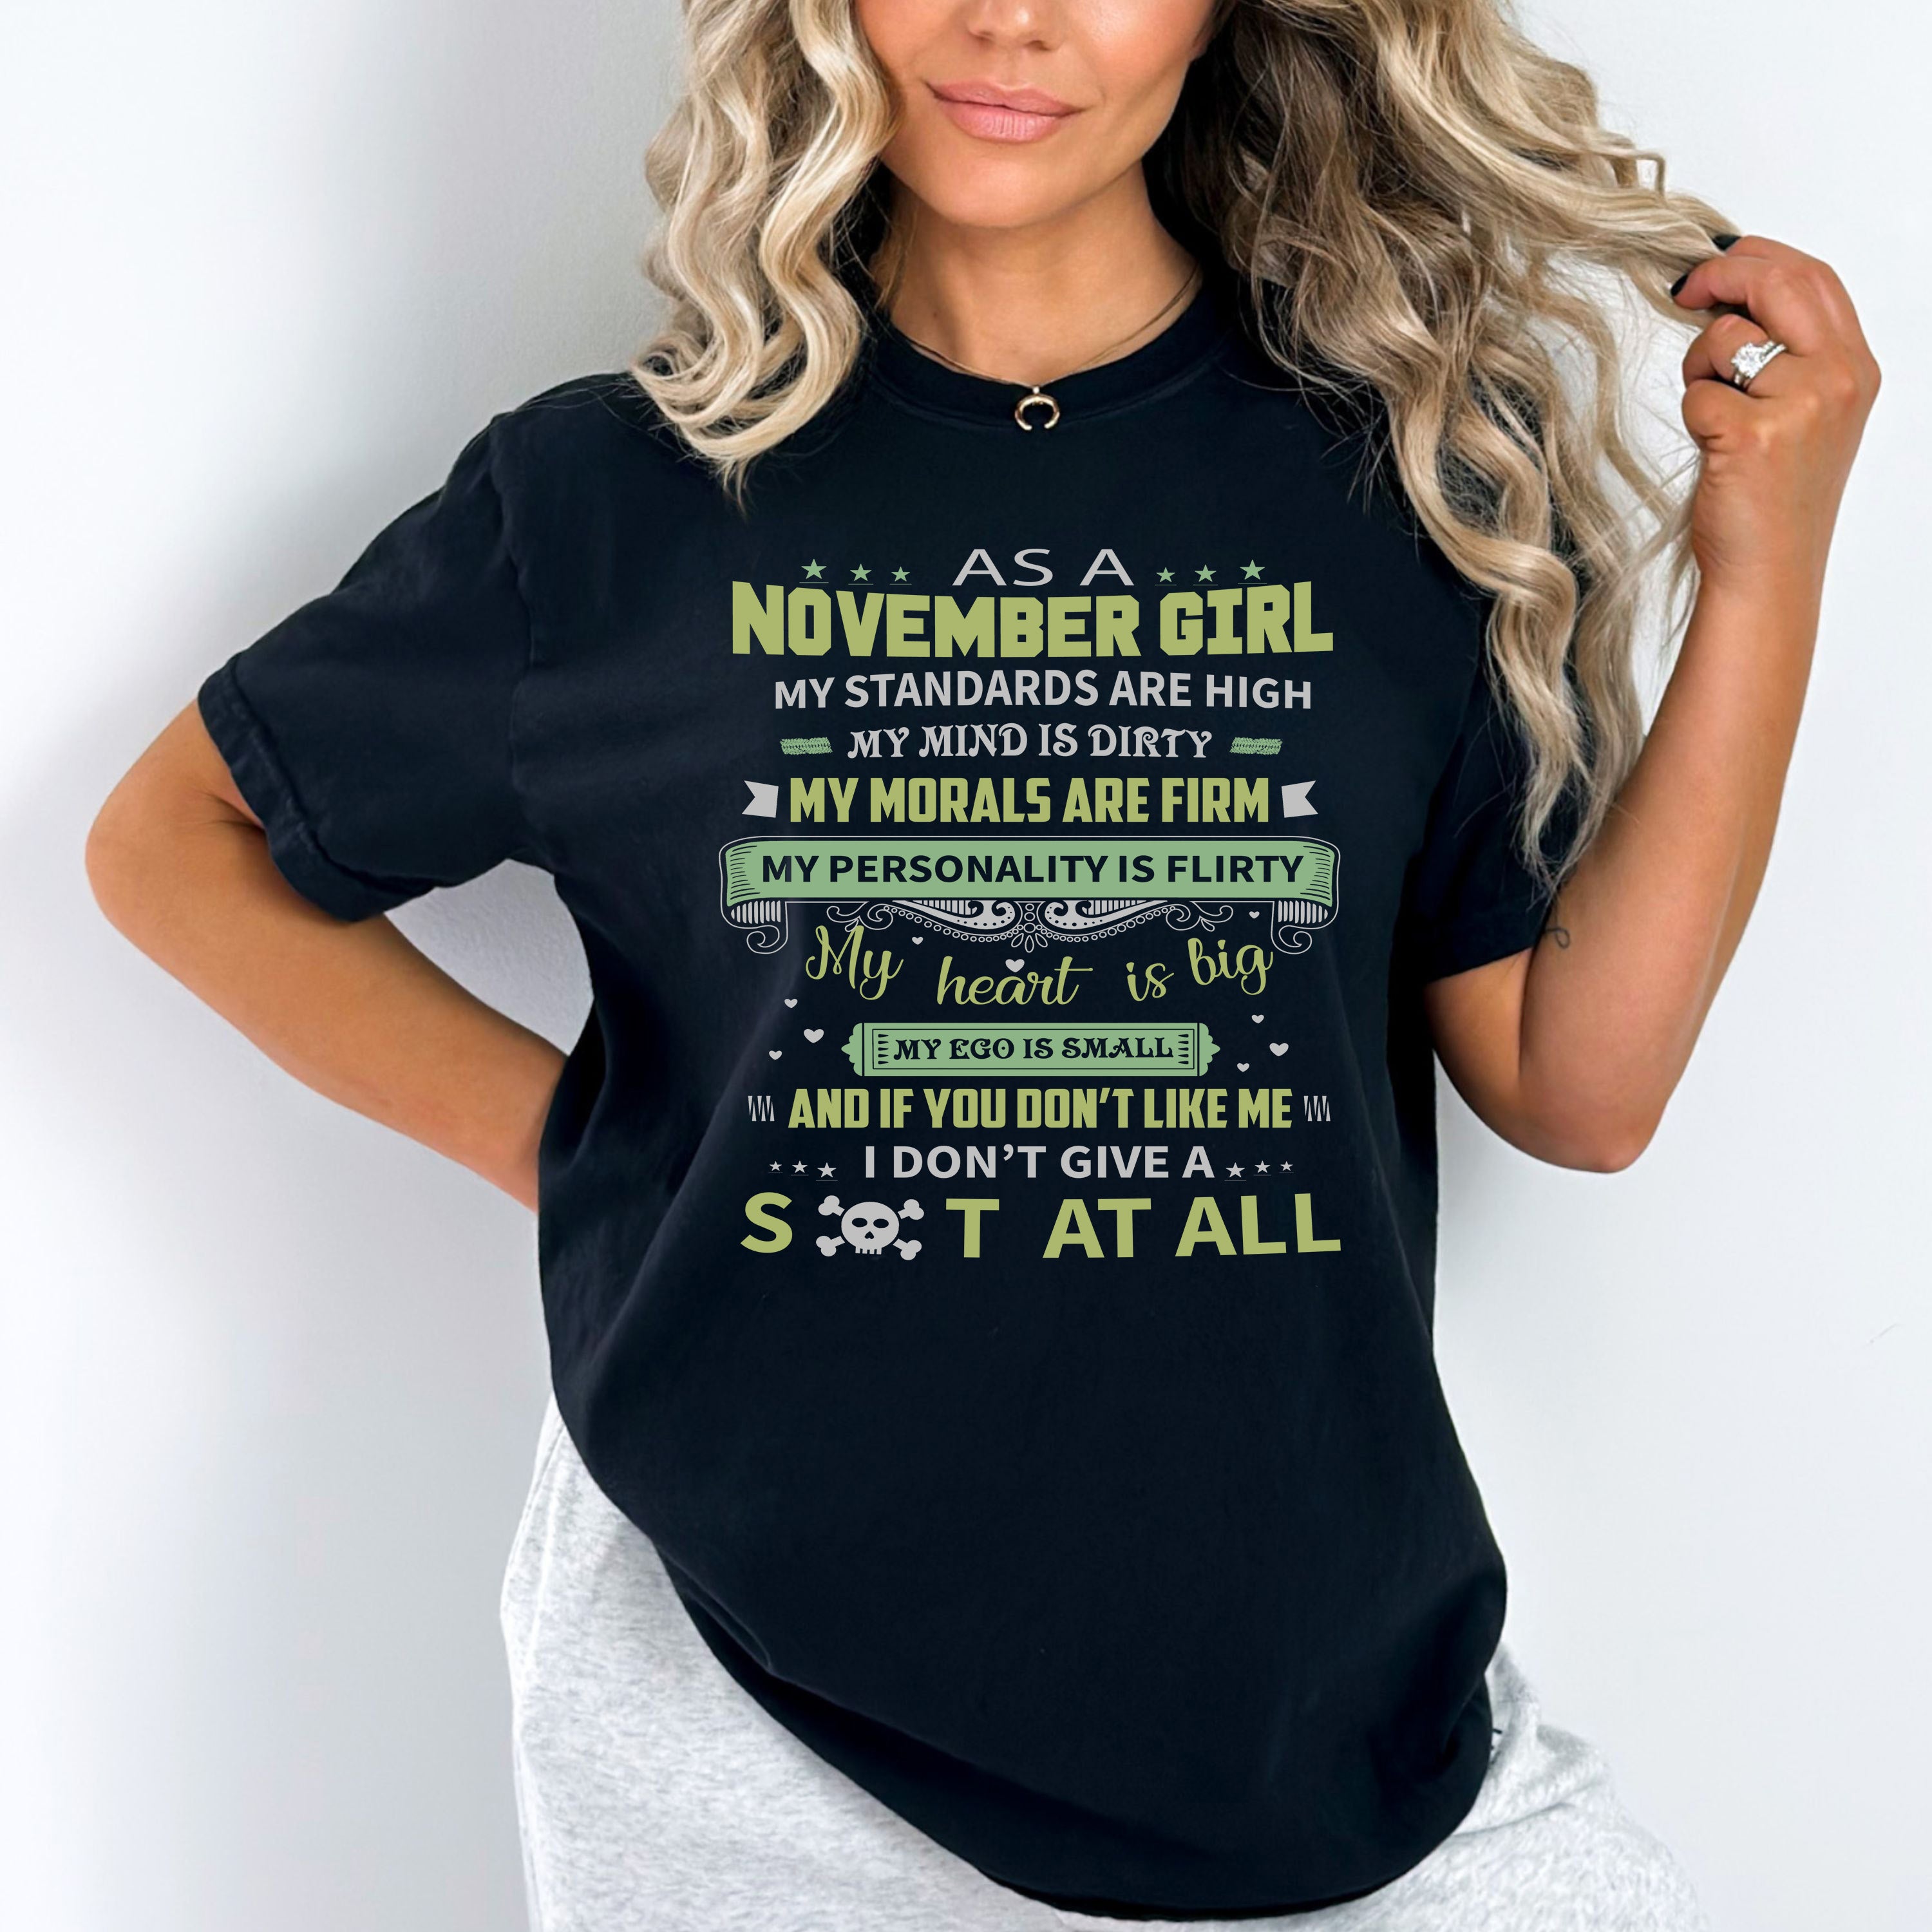 "As A November Girl My Standards Are High"